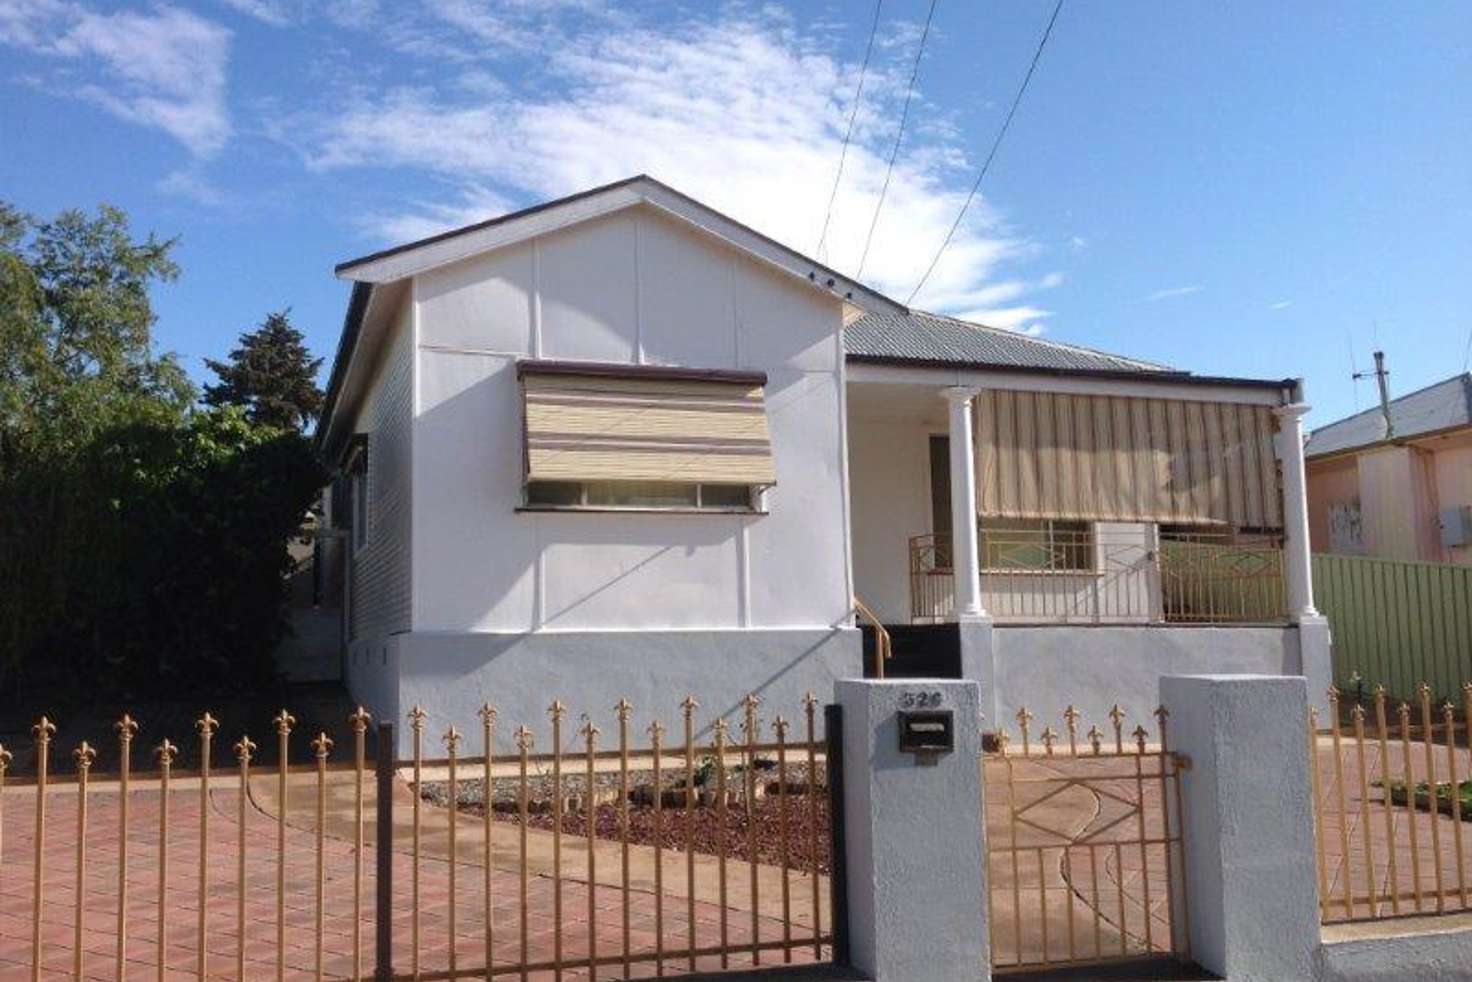 Main view of Homely house listing, 326 Hebbard St, Broken Hill NSW 2880